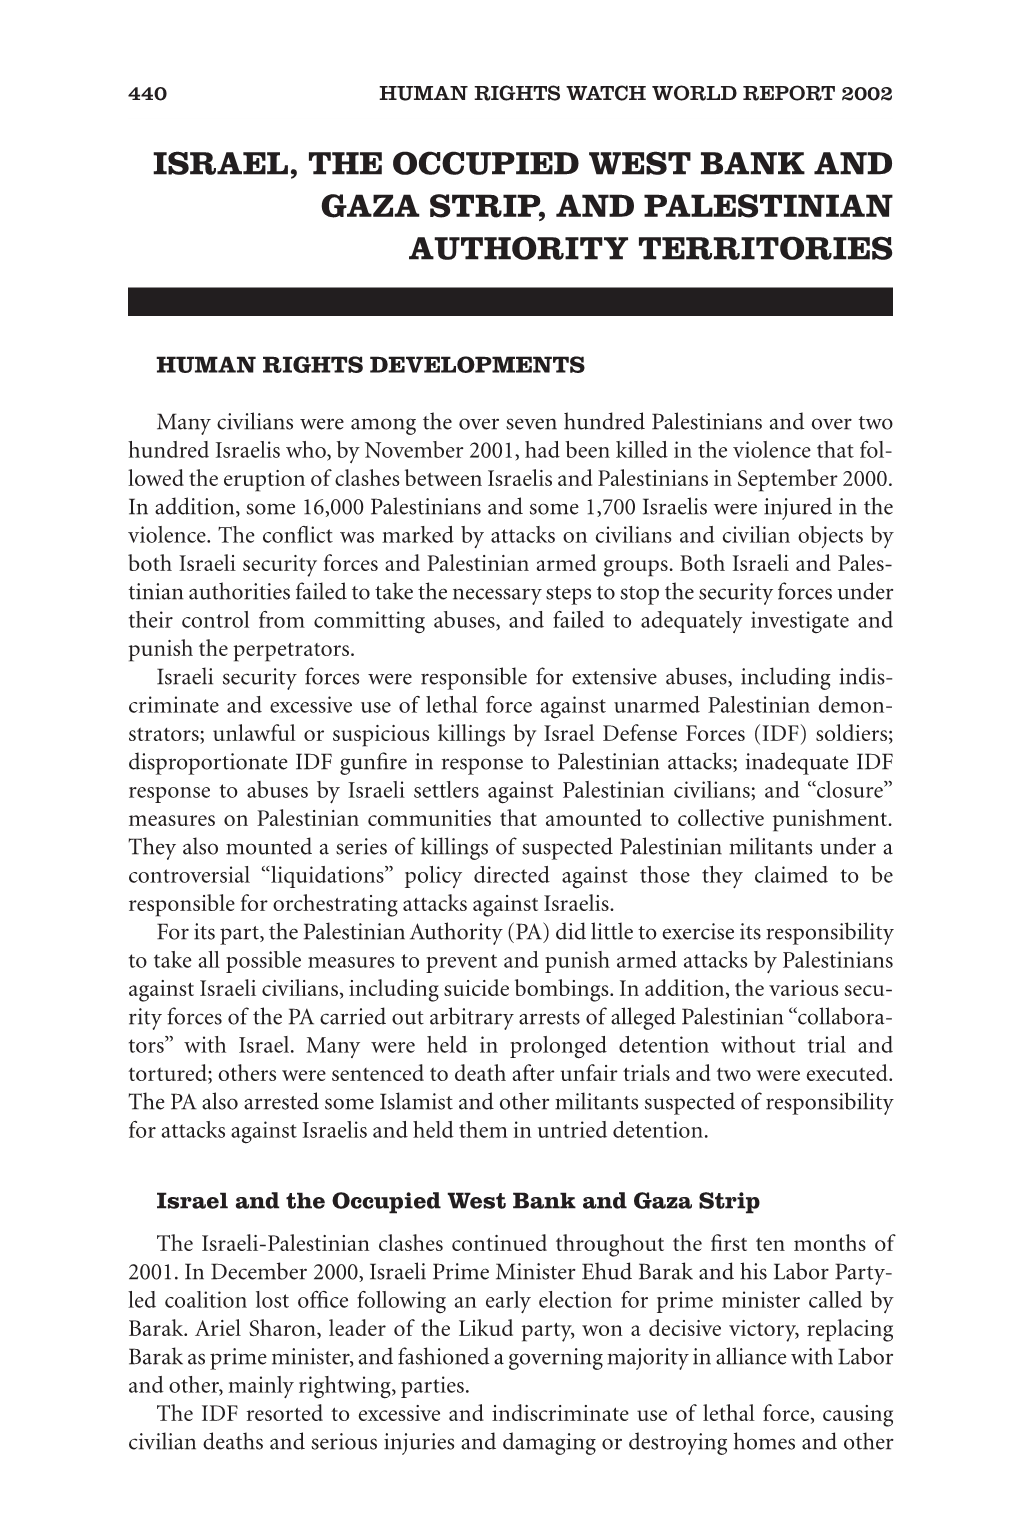 Israel, the Occupied West Bank and Gaza Strip, and Palestinian Authority Territories